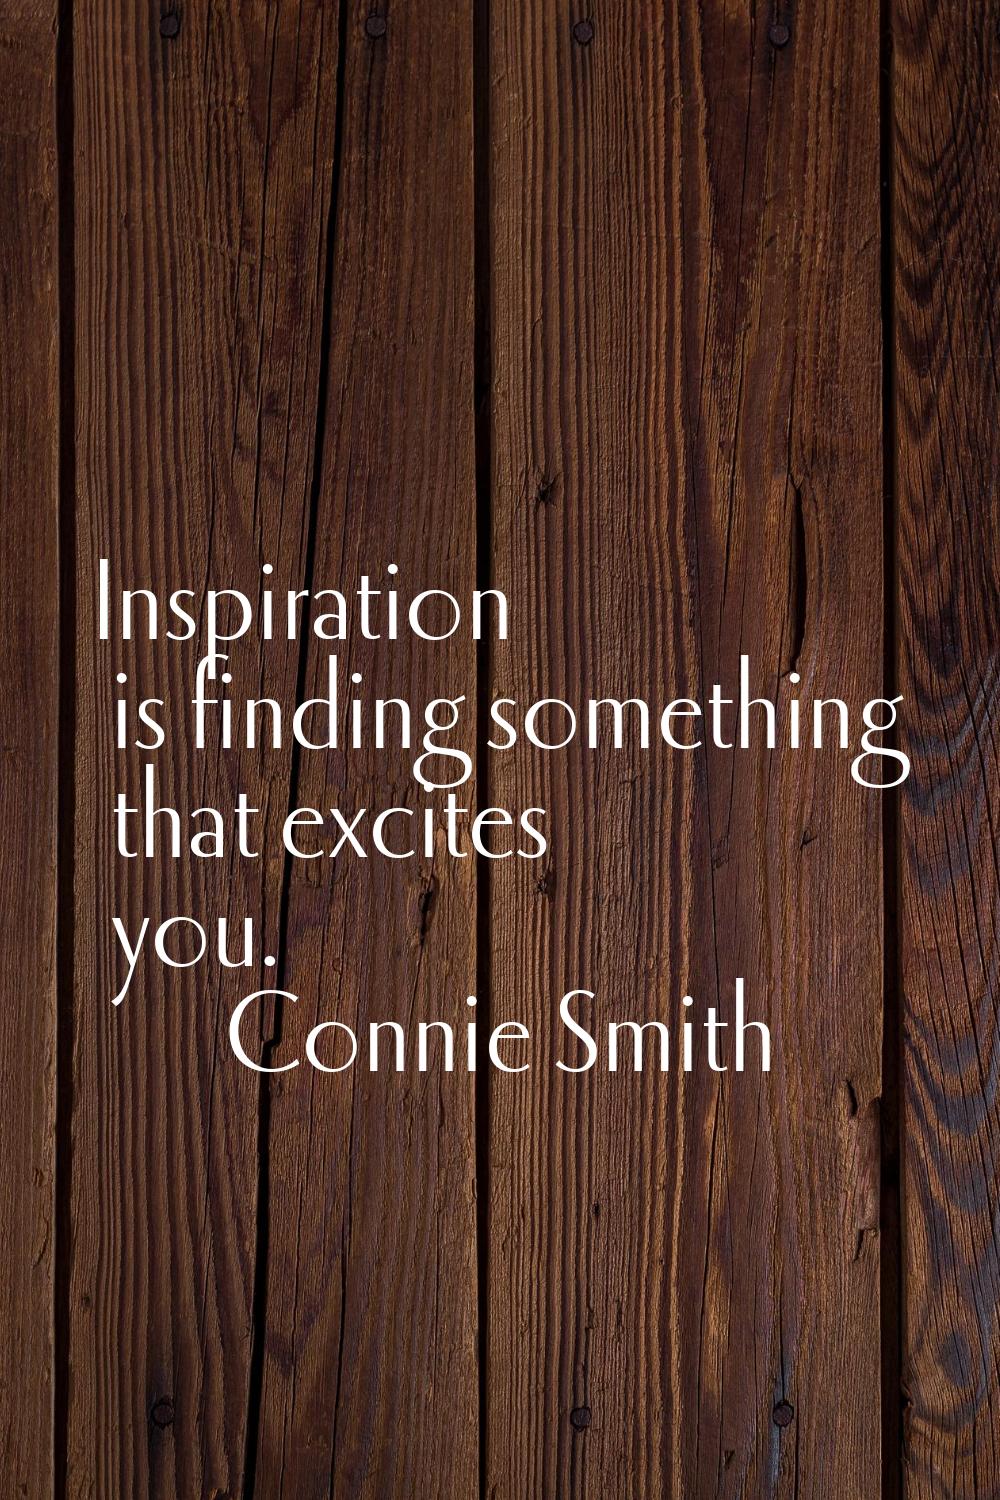 Inspiration is finding something that excites you.